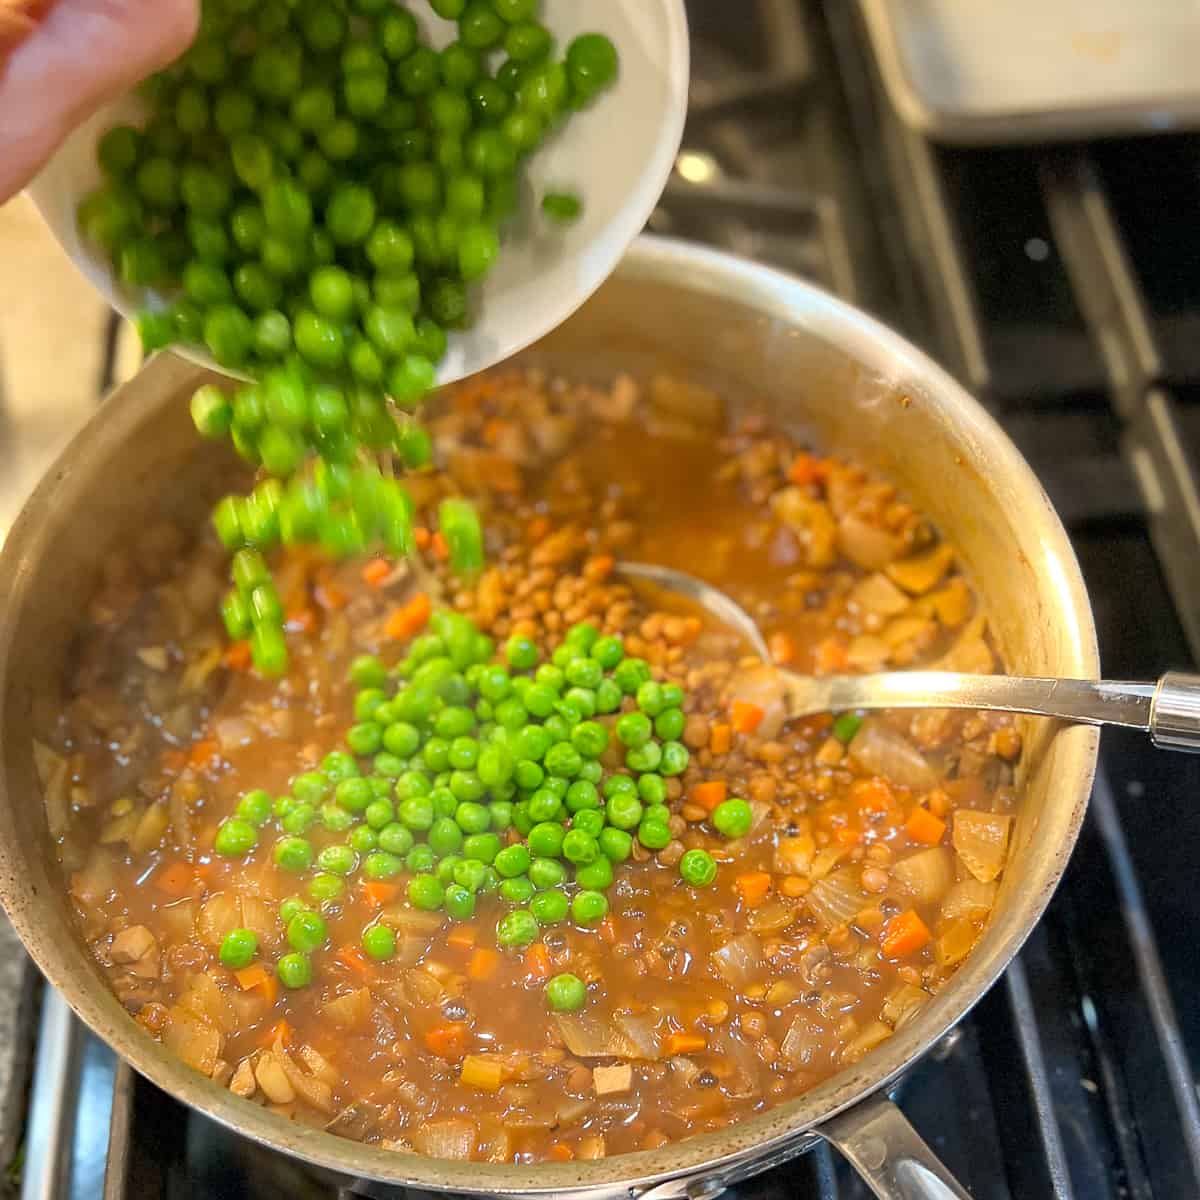 green peas being added to the cooked lentils and veggies